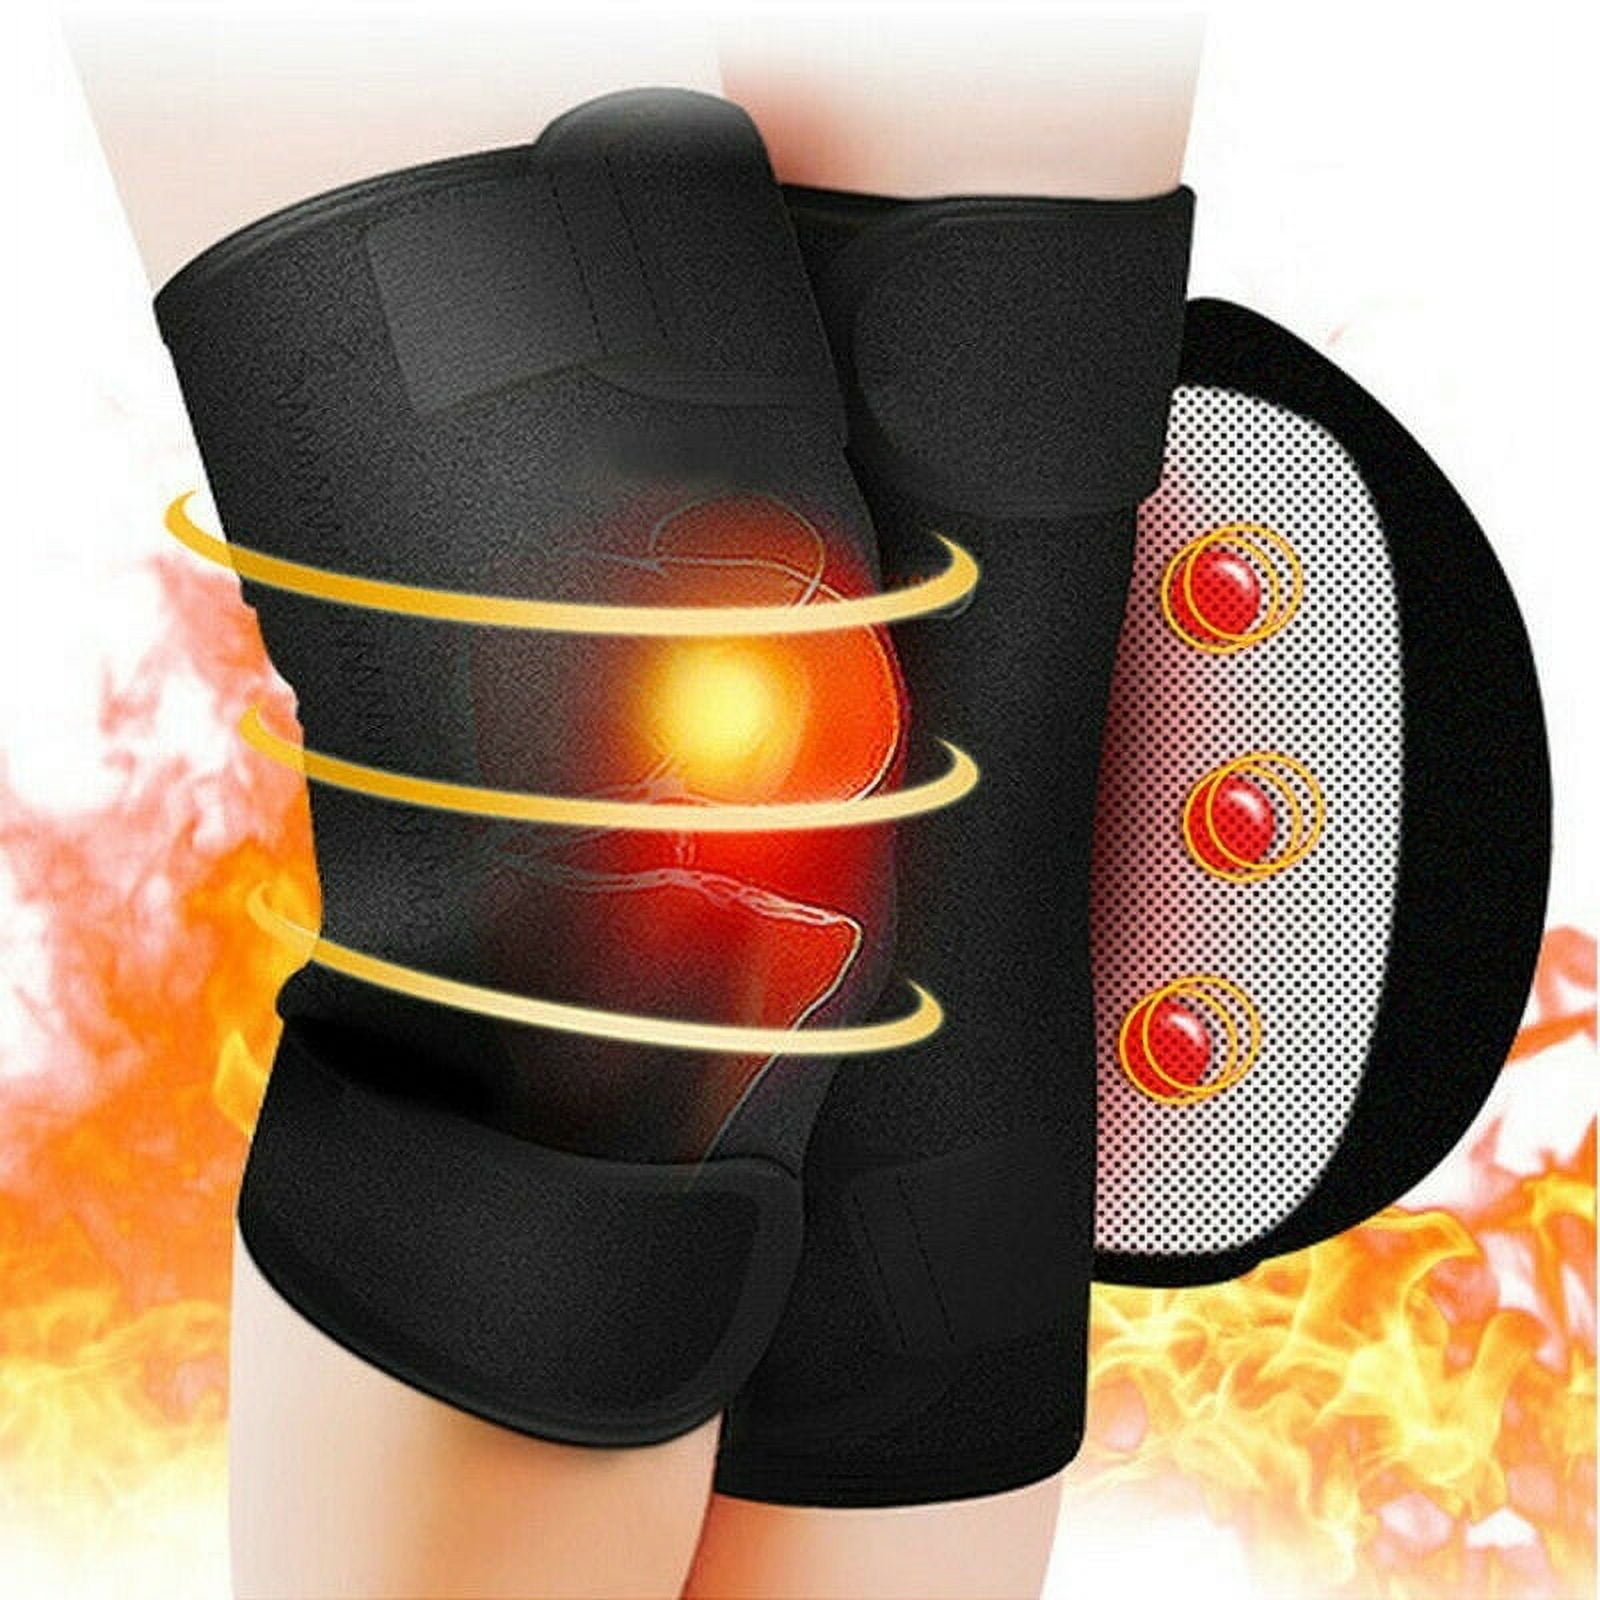 Masted Knee Brace by Insightful Products